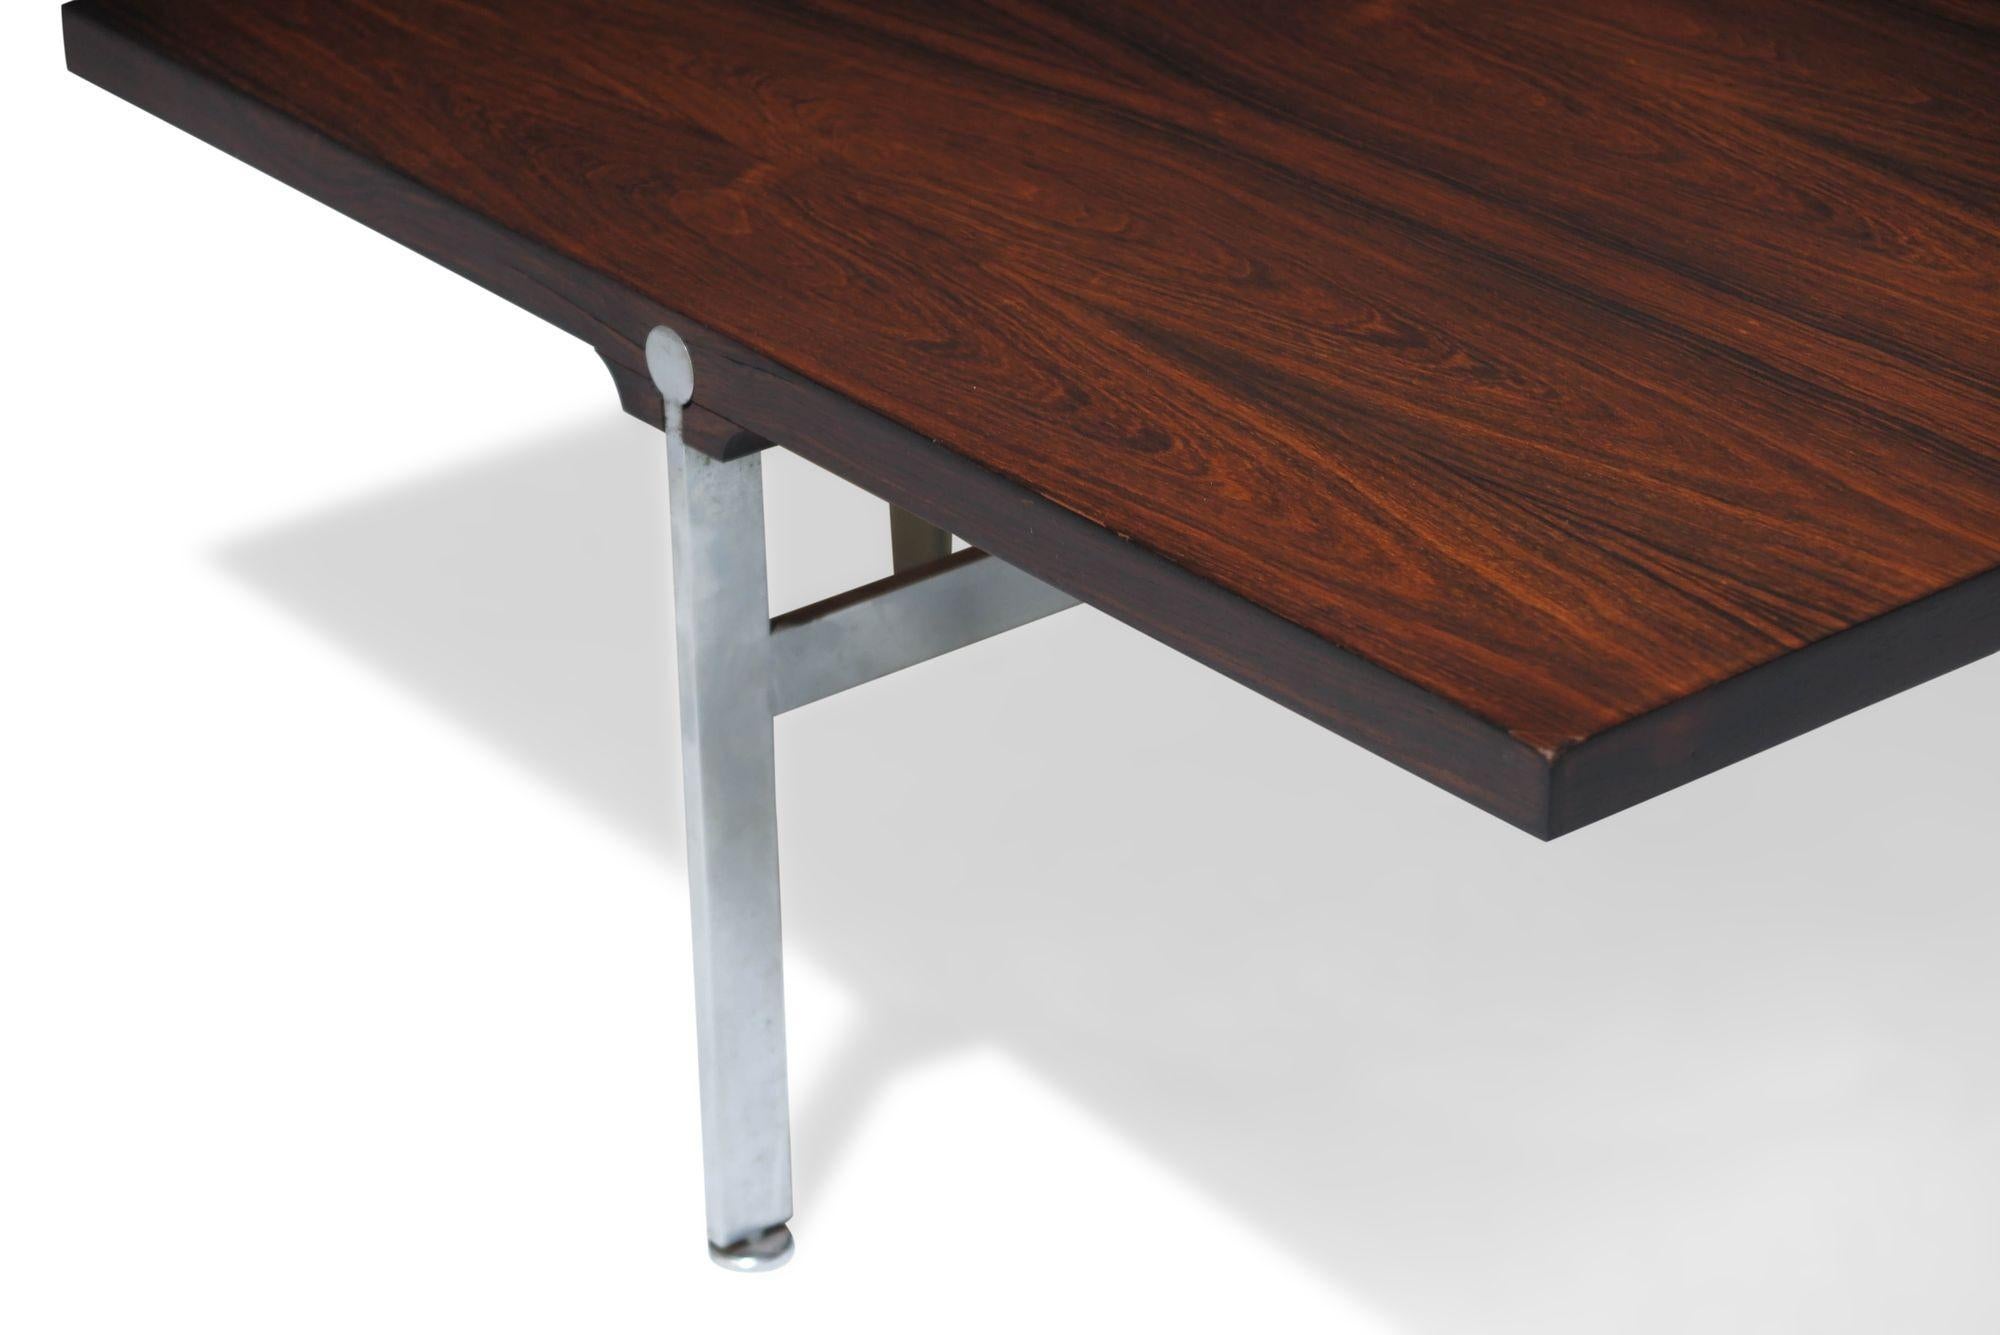 Illum Wikkelso Rosewood and Steel Midcentury Danish Coffee Table For Sale 2